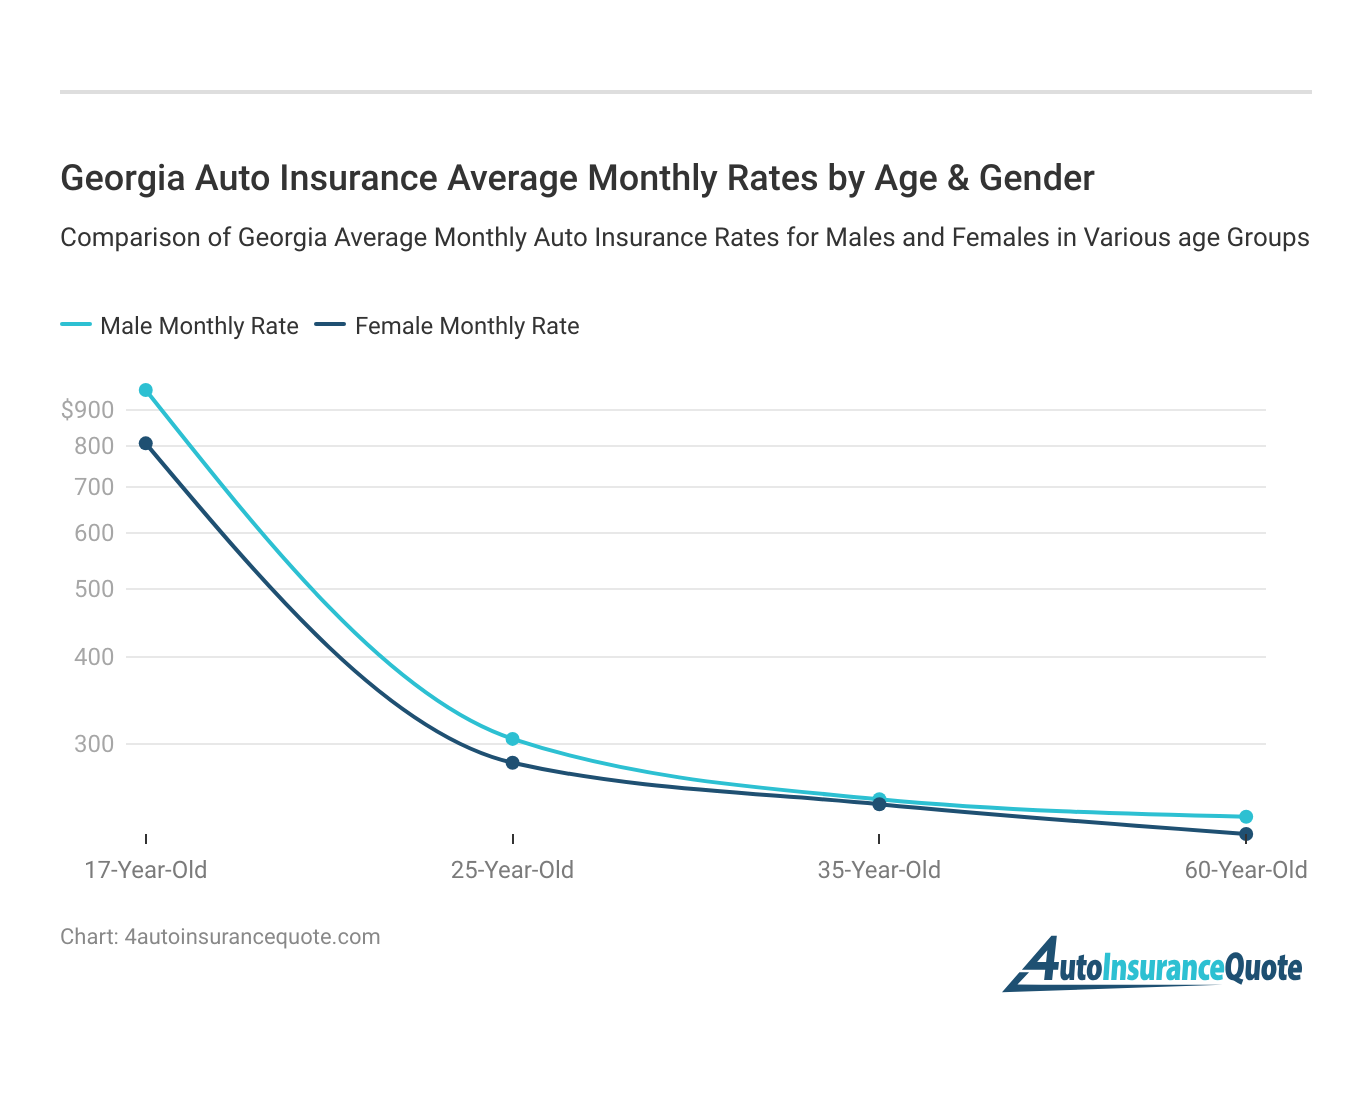 <h3>Georgia Auto Insurance Average Monthly Rates by Age & Gender</h3>